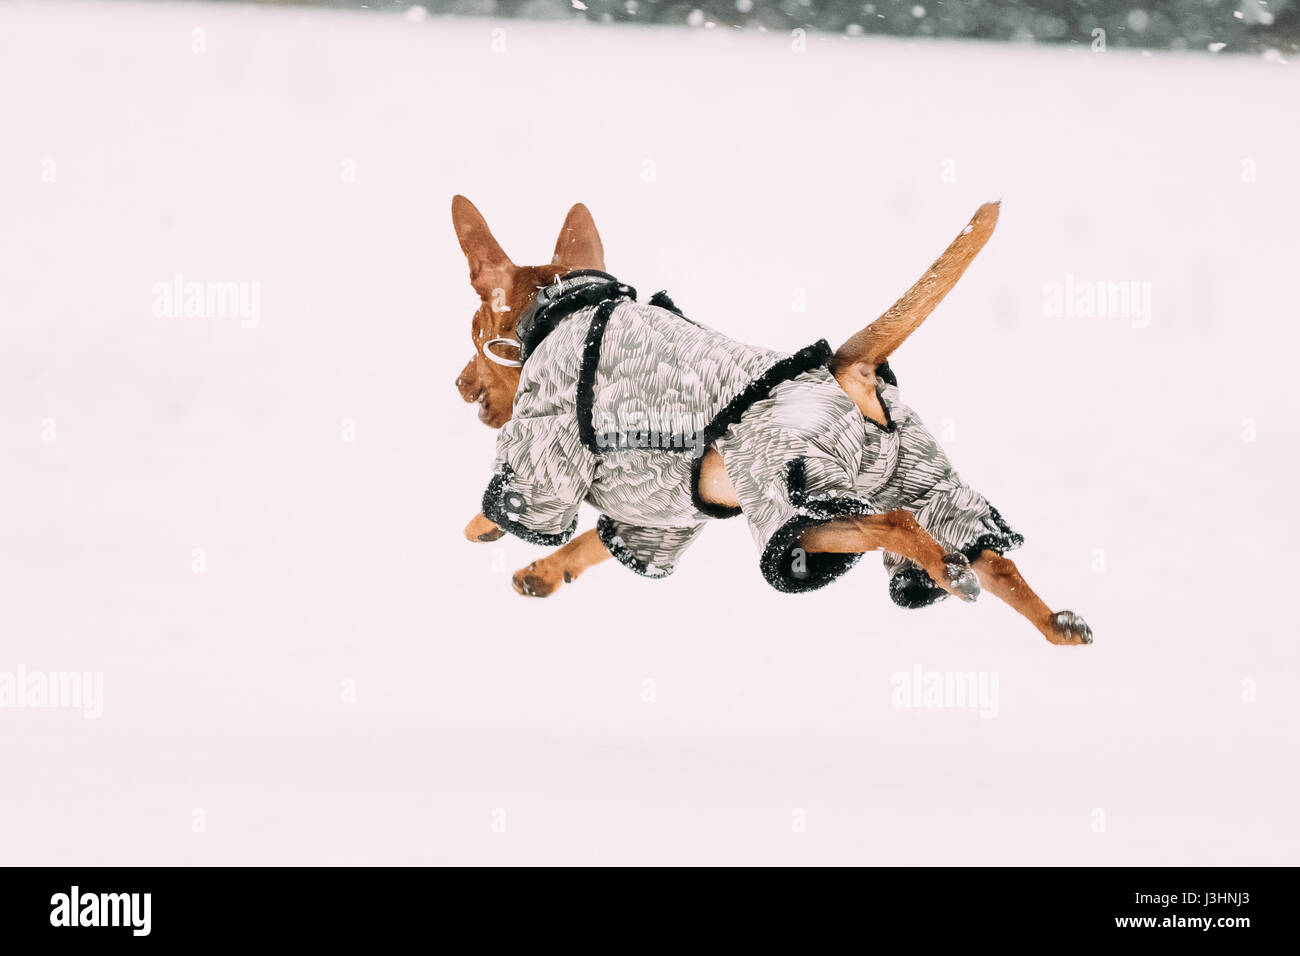 Funny Dog Red Brown Miniature Pinscher Pincher Min Pin Playing And Running Outdoor In Snow, Winter Season. Playful Pets Outdoors. Stock Photo